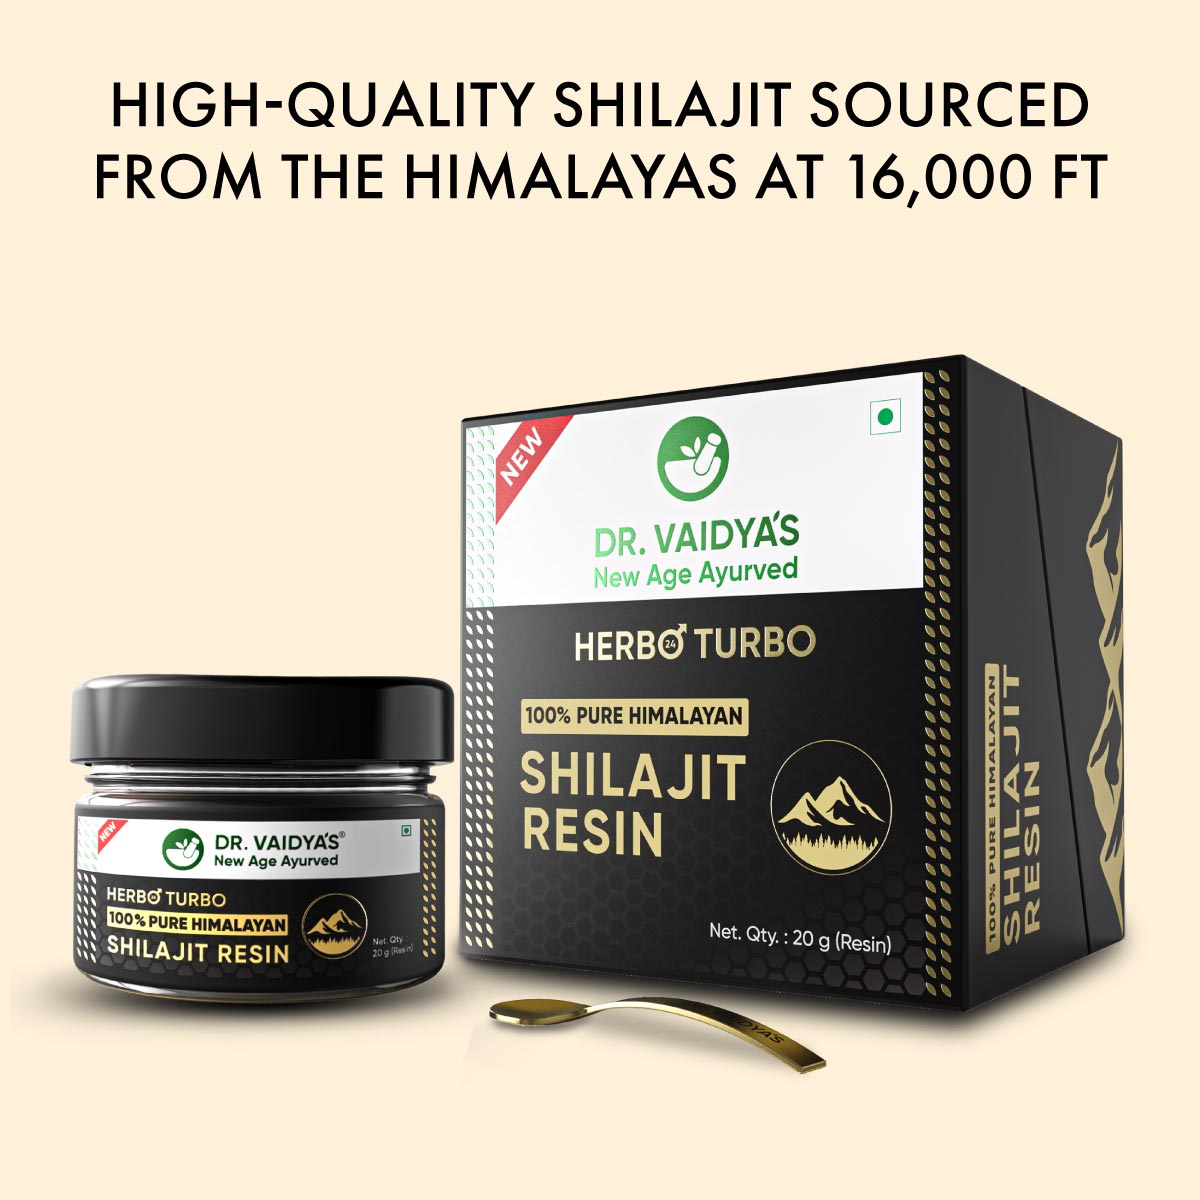 H24T ShilajitResin: Made From 100% Pure Himalayan Shilajit To Help Boost Stamina, Strength & Energy